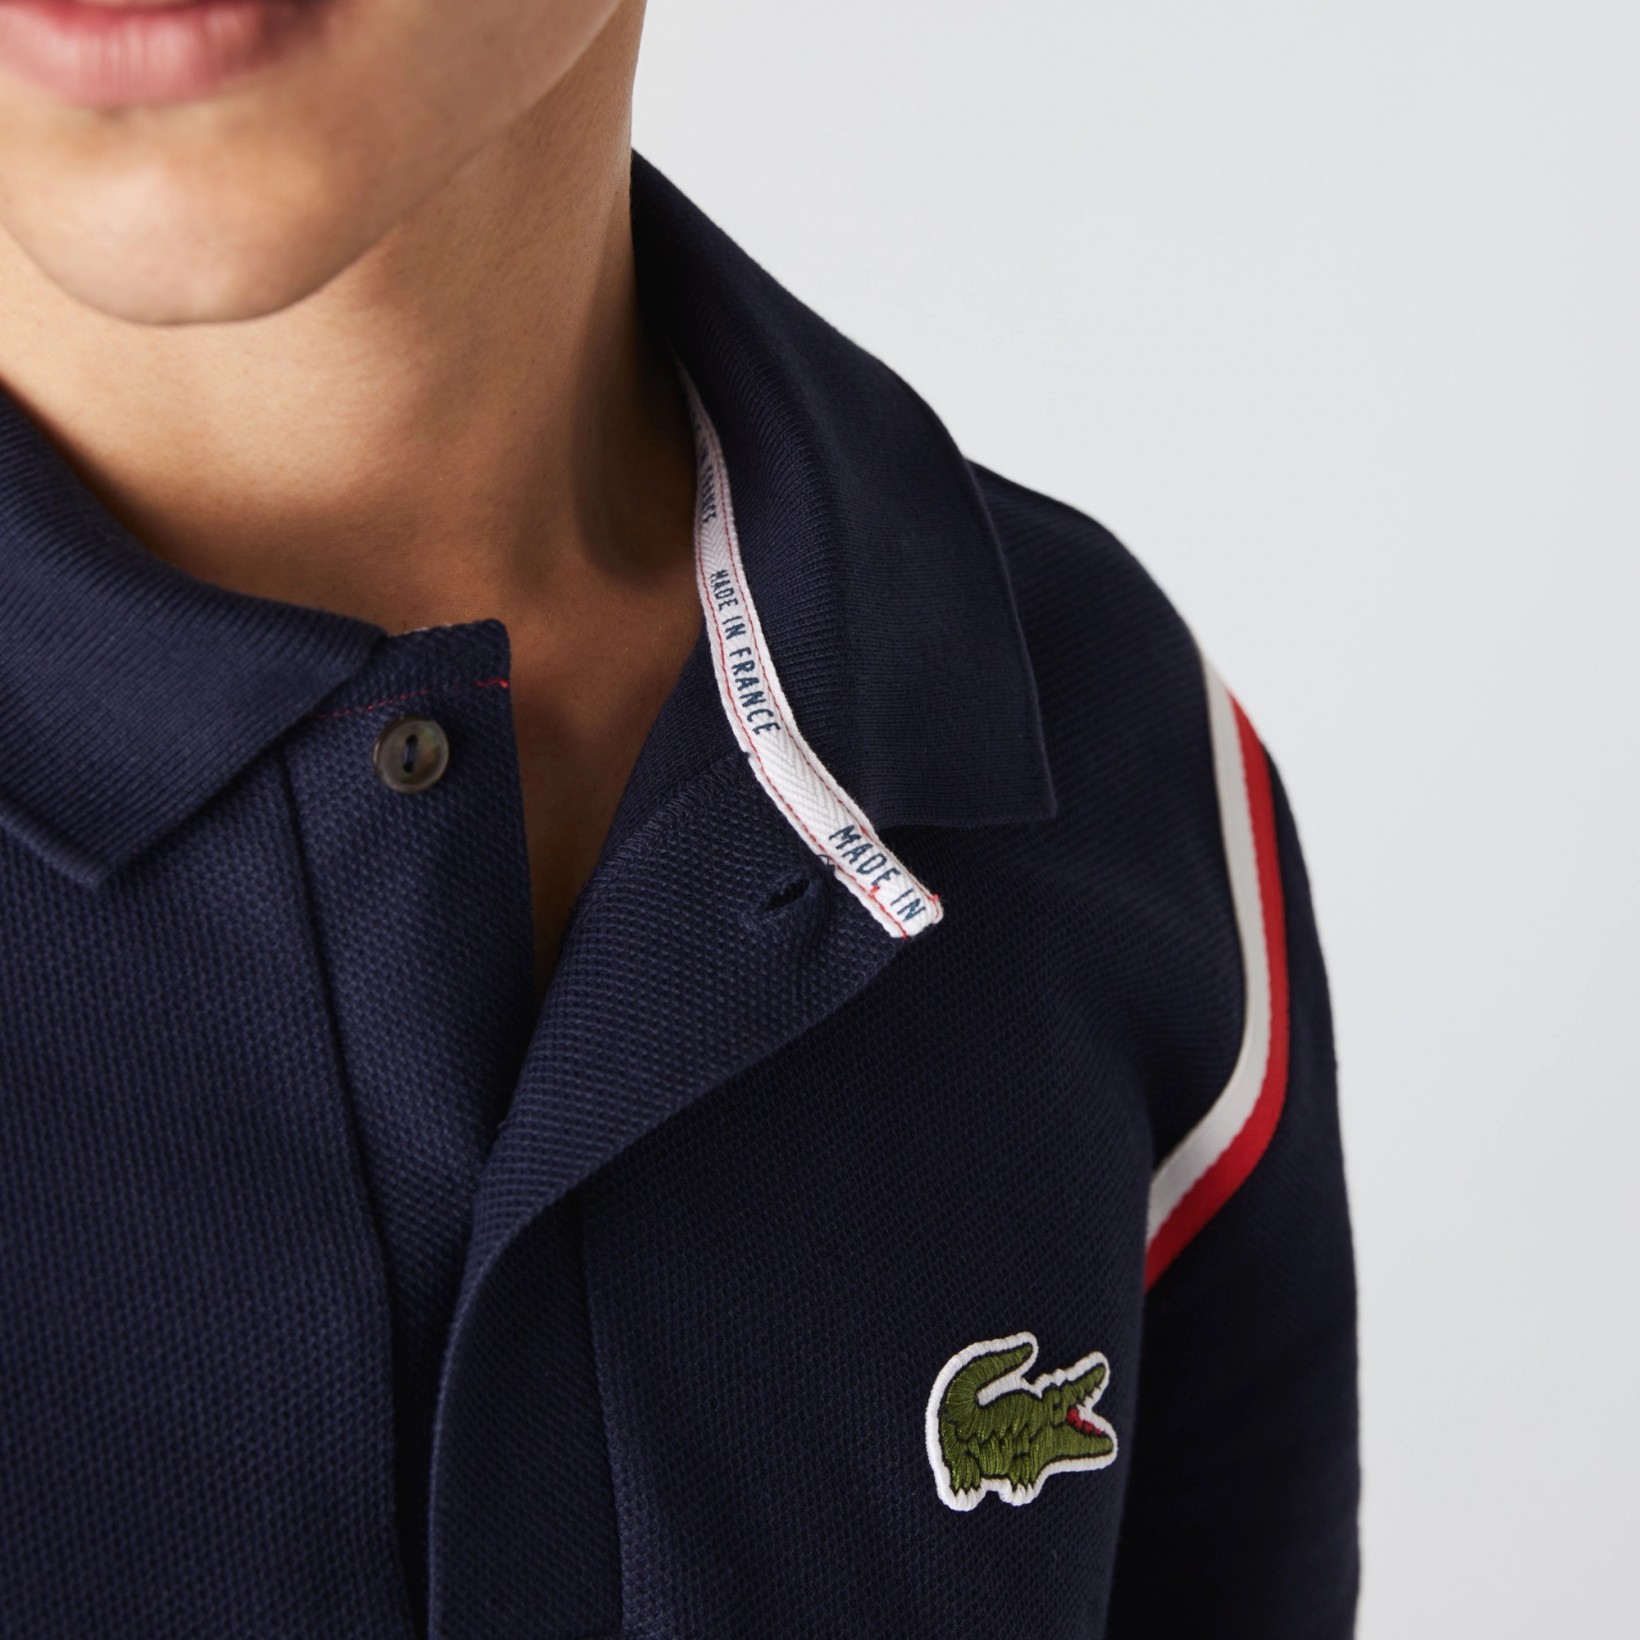 Lacoste "Made in France" Regular Fit Organic Cotton Polo Shirt Navy Blue